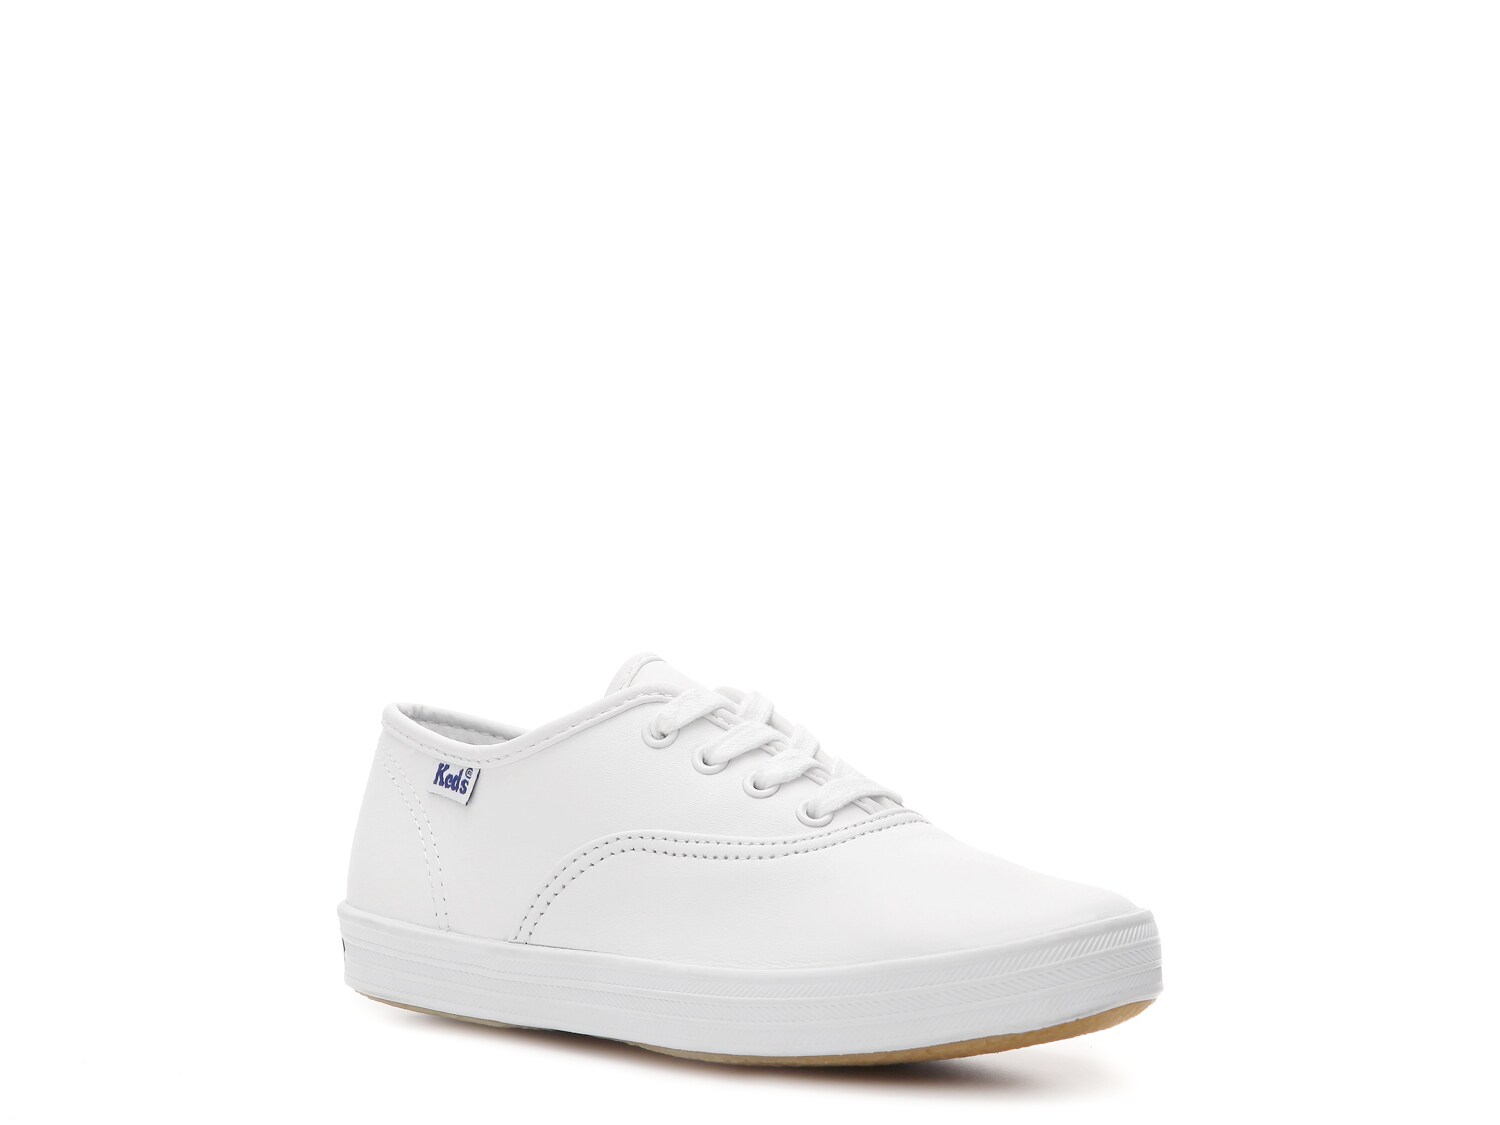 Keds Champion Youth Leather Sneaker | DSW